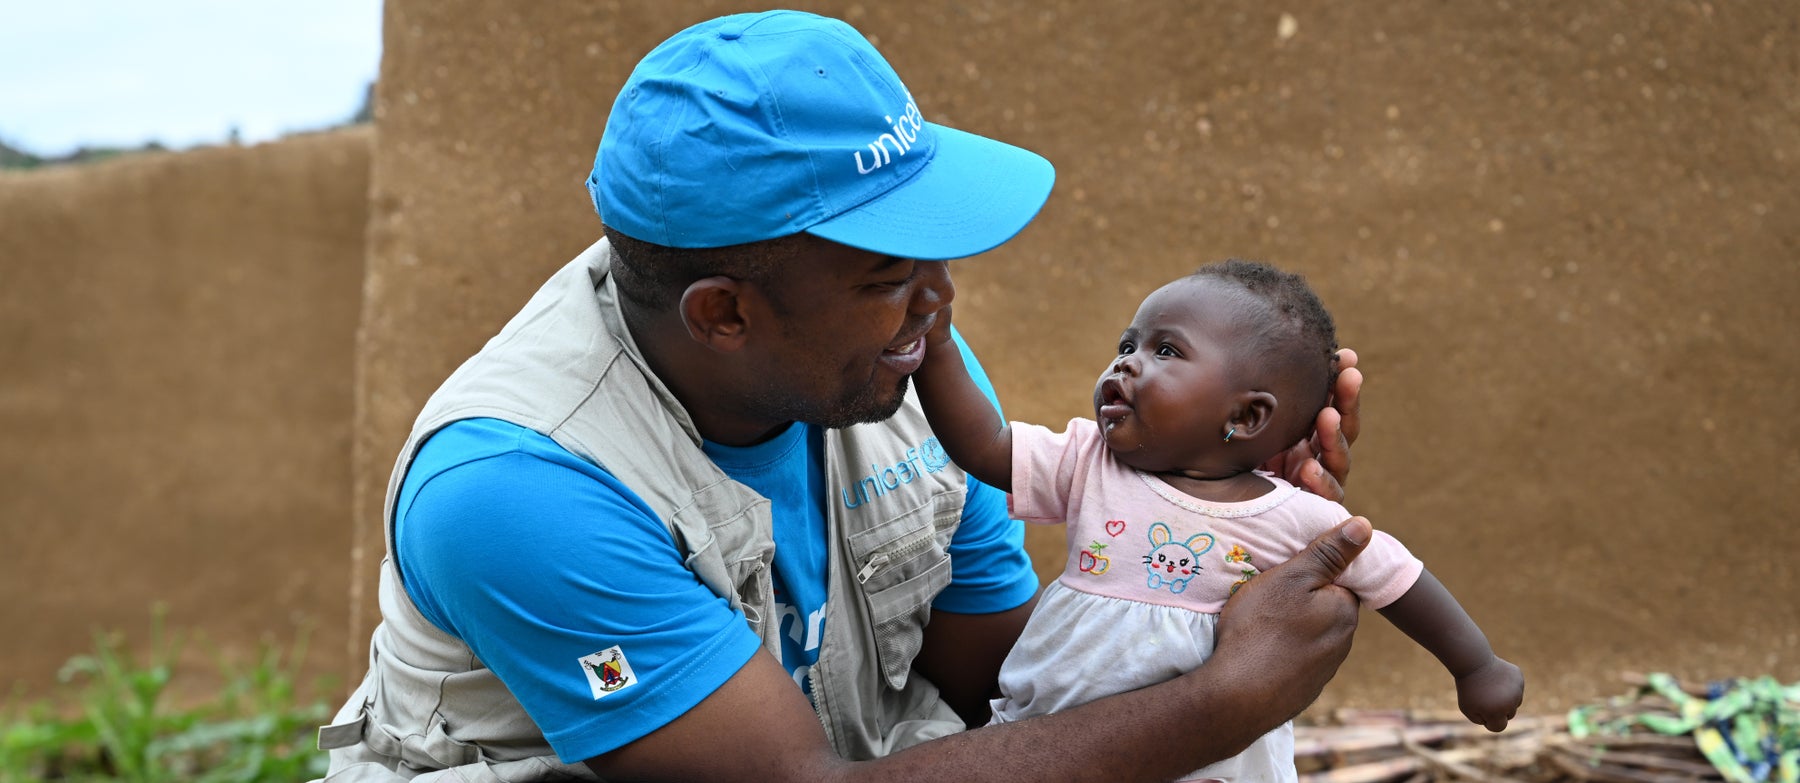 A UNICEF staff member, playing with a little girl, at the site of former hostages, in Zamay, in the extreme north of Cameroon.